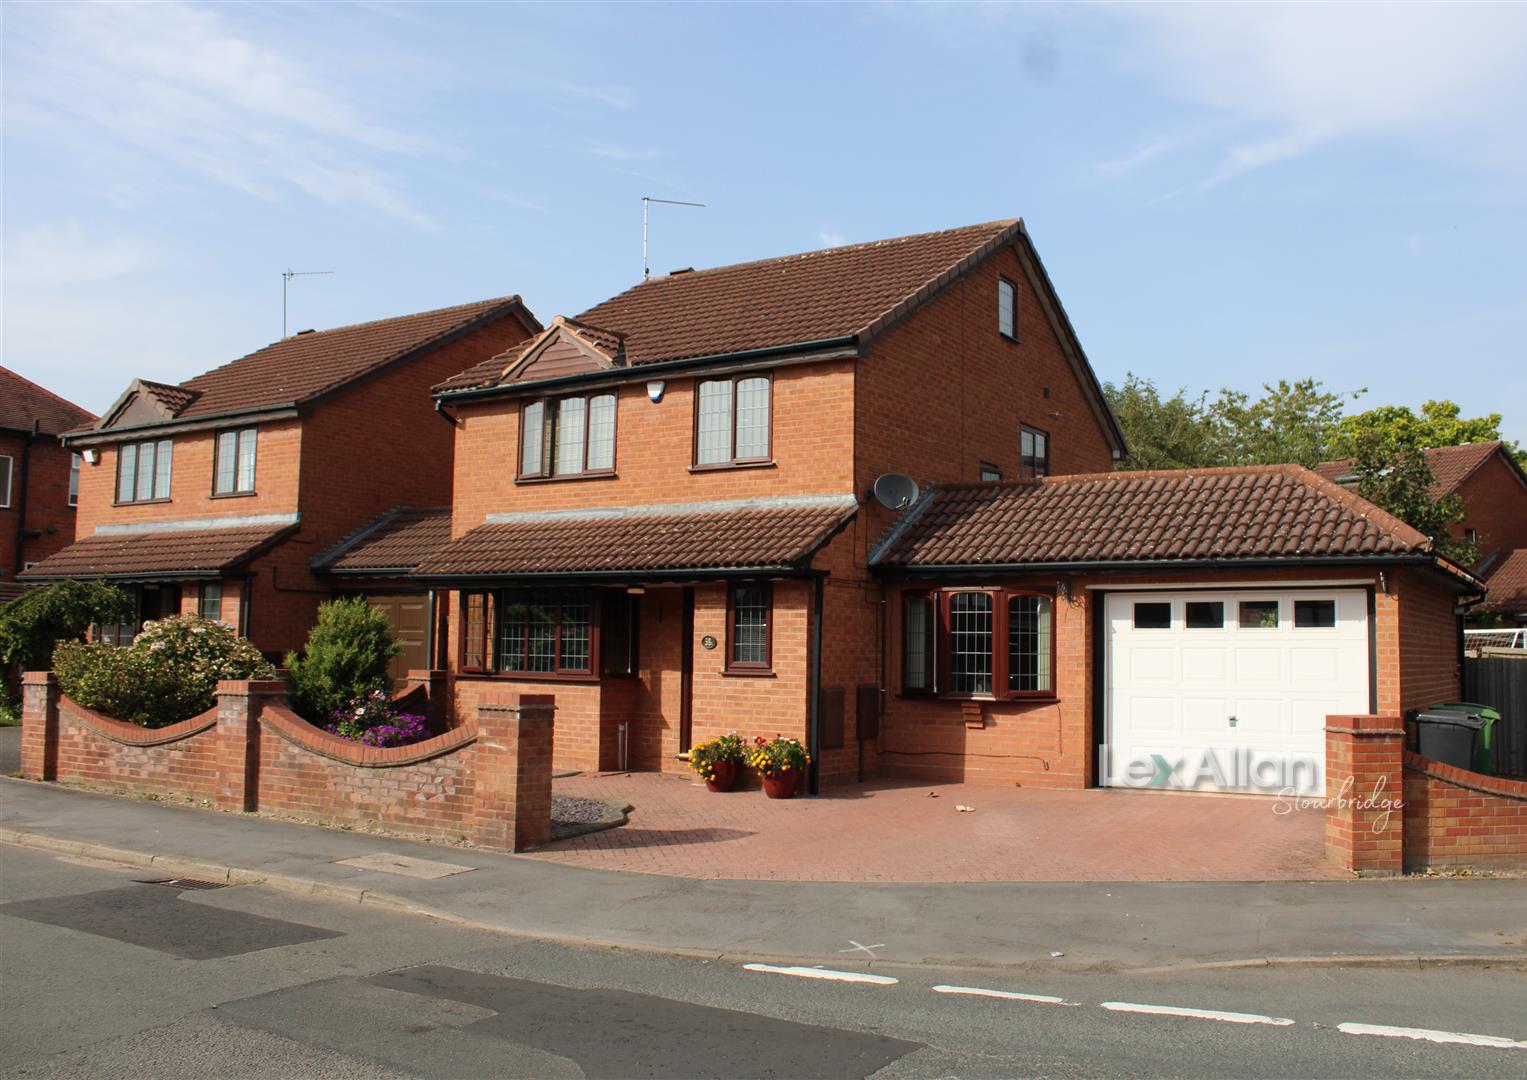 4 bed detached house for sale in Bowling Green Road, Stourbridge - Property Image 1